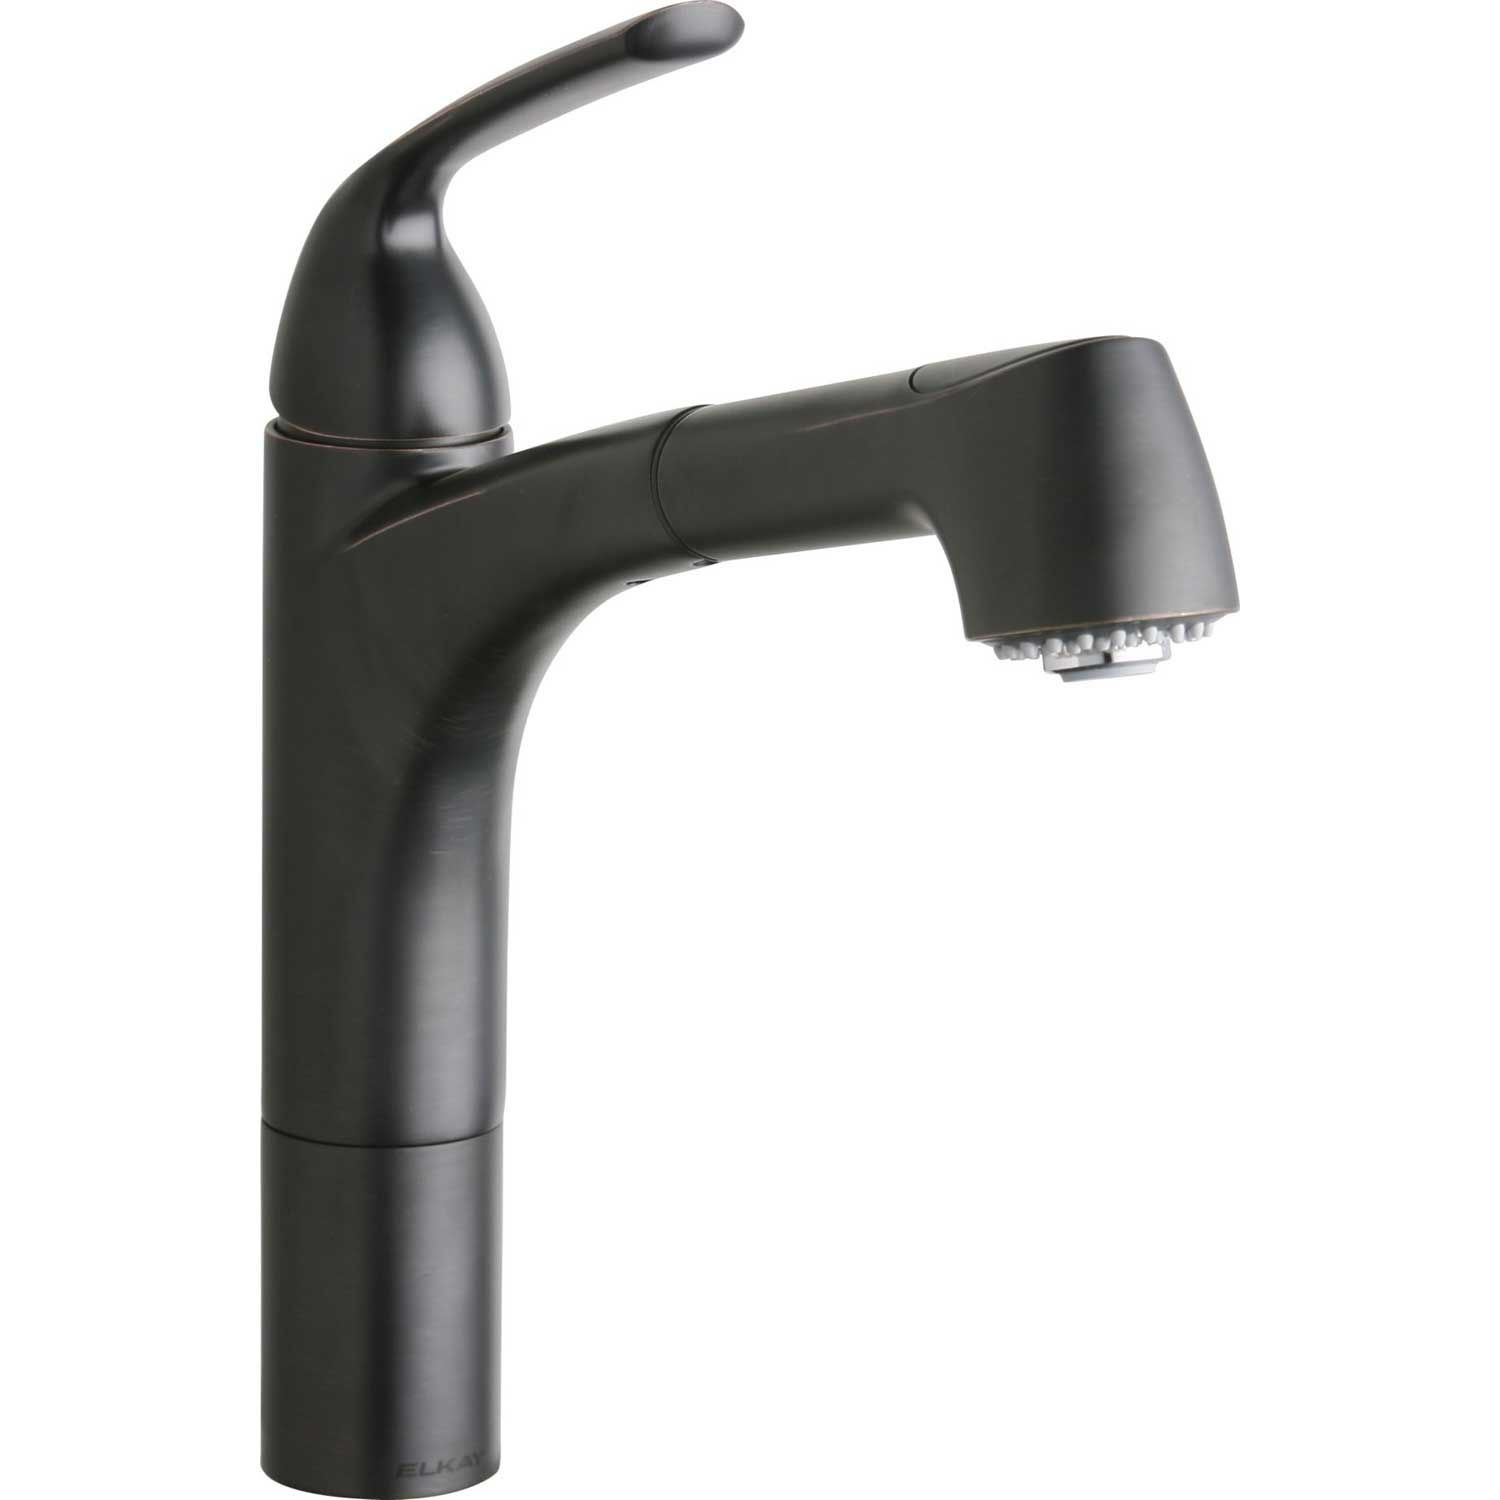 Elkay Gourmet Pull-Out Kitchen Faucet, Oil Rubbed Bronze ...